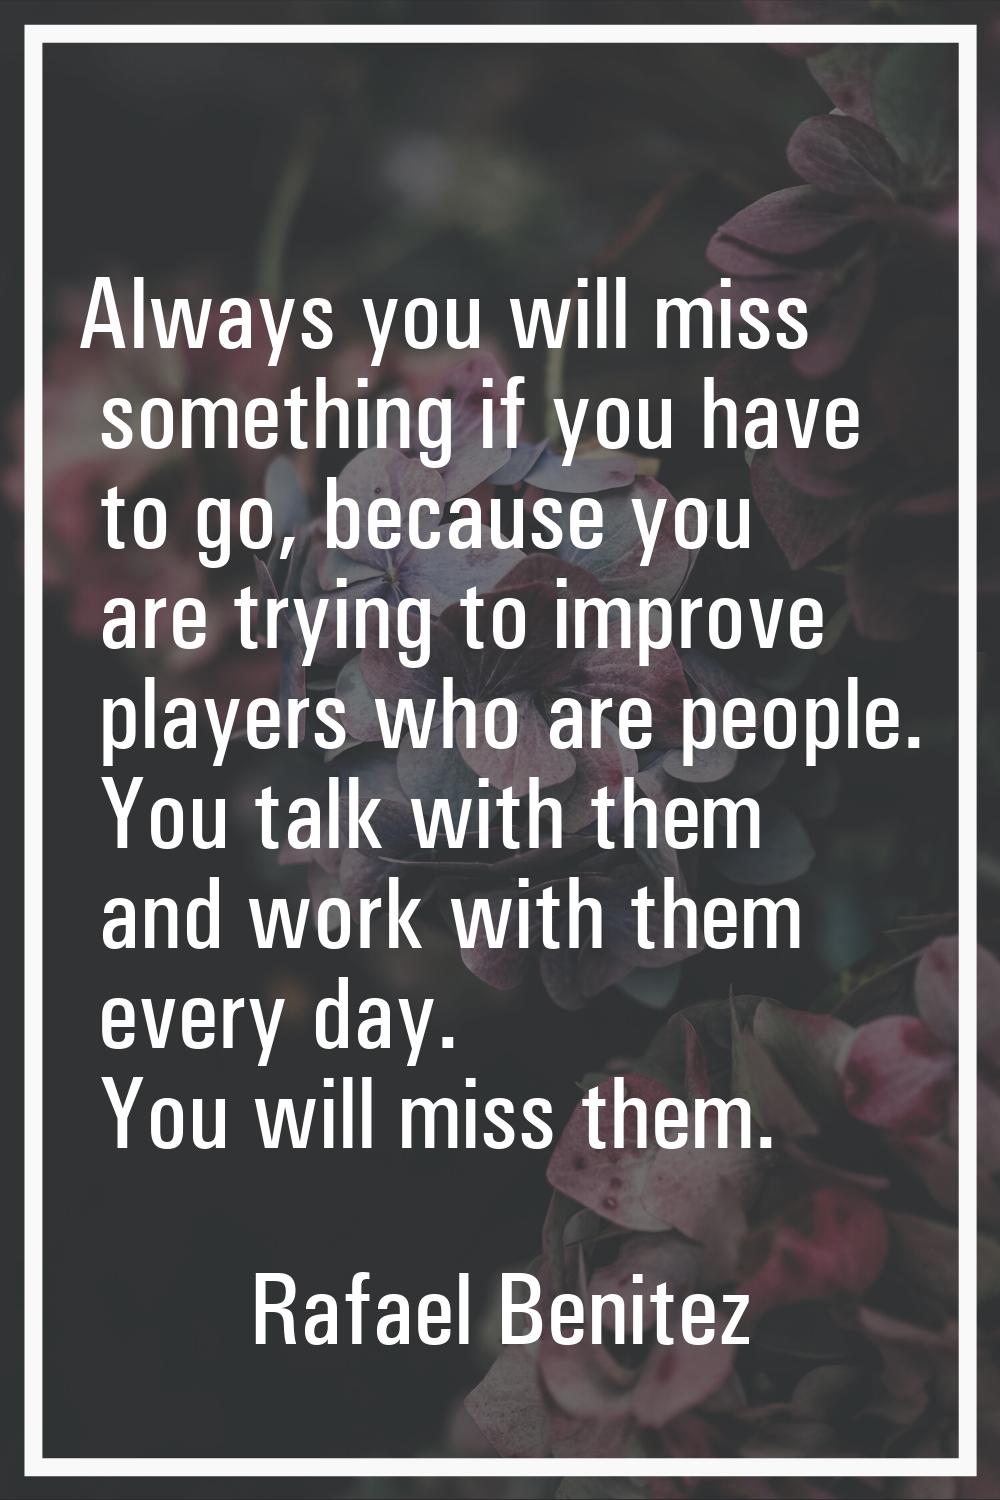 Always you will miss something if you have to go, because you are trying to improve players who are